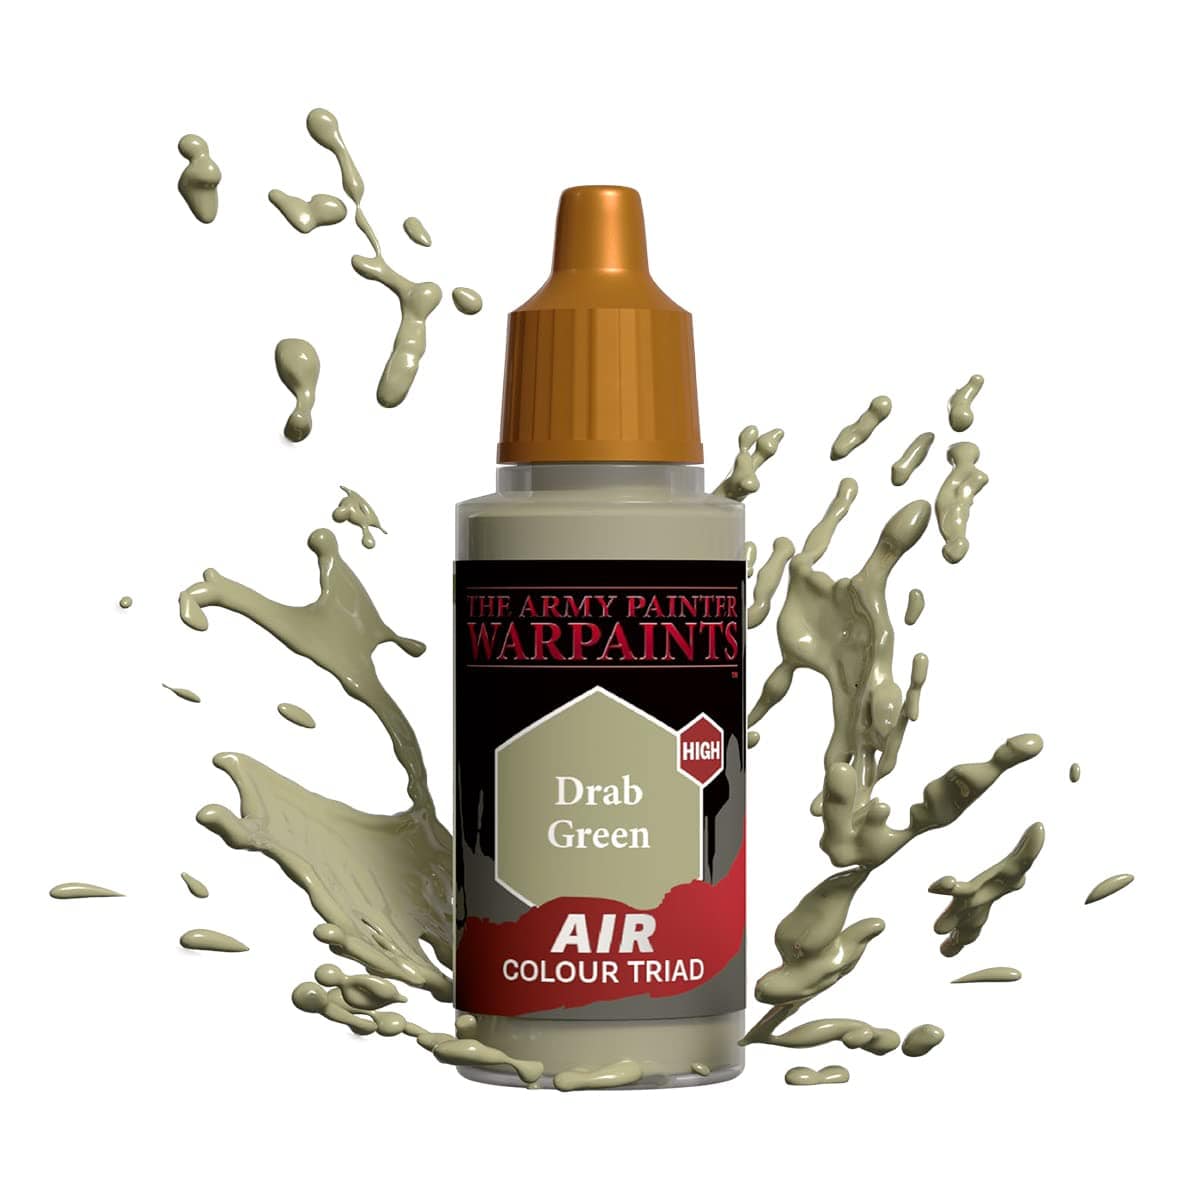 The Army Painter Accessories The Army Painter Warpaints Air: Drab Green 18ml